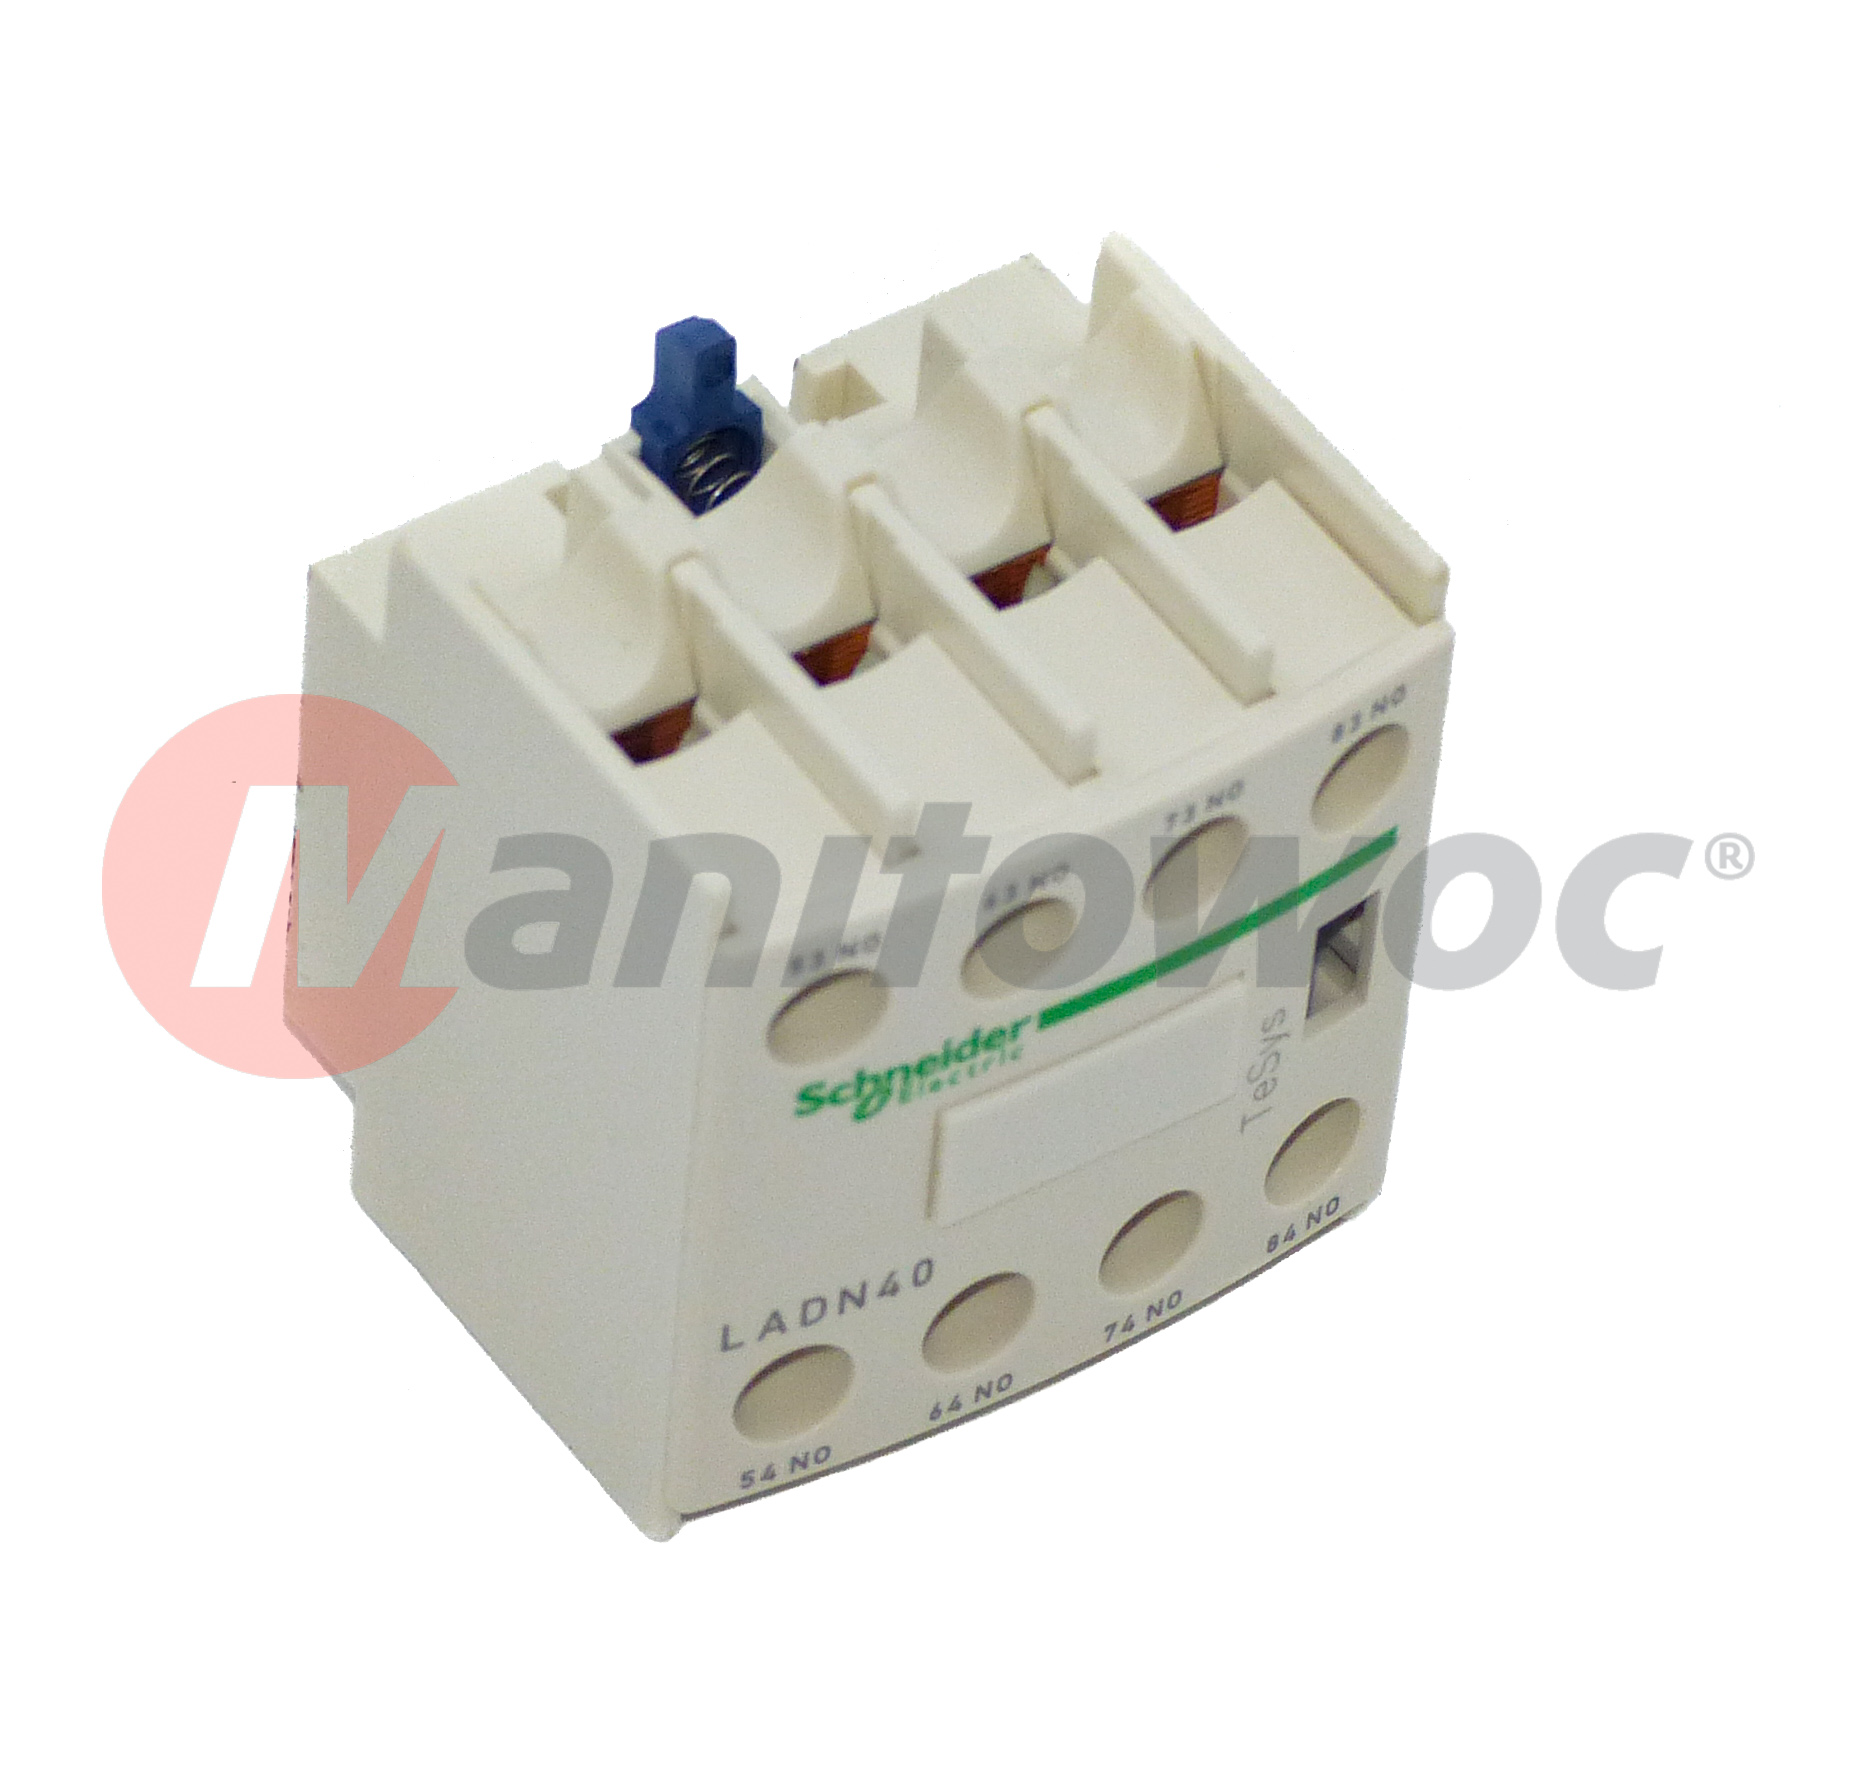 8 701 0031 - "AUXILIARY BLOCK 3F+10 FRONT"